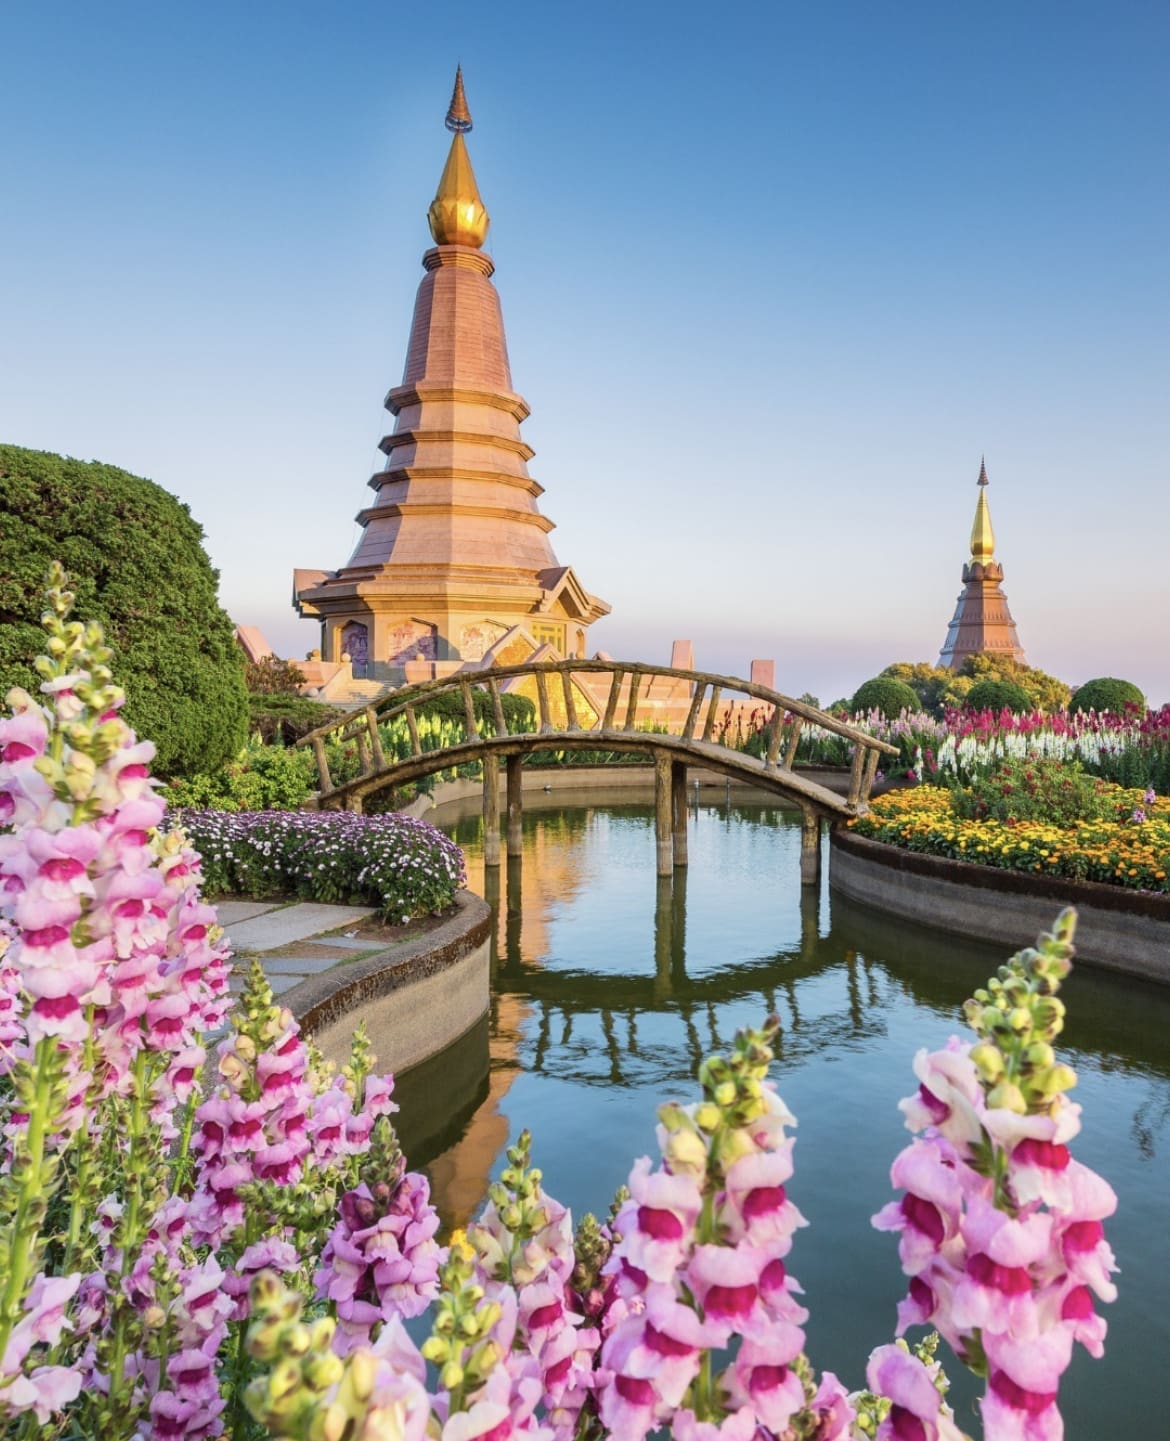 Temple gardens, Chiang Mai - What to Wear When Visiting Thailand's Temples